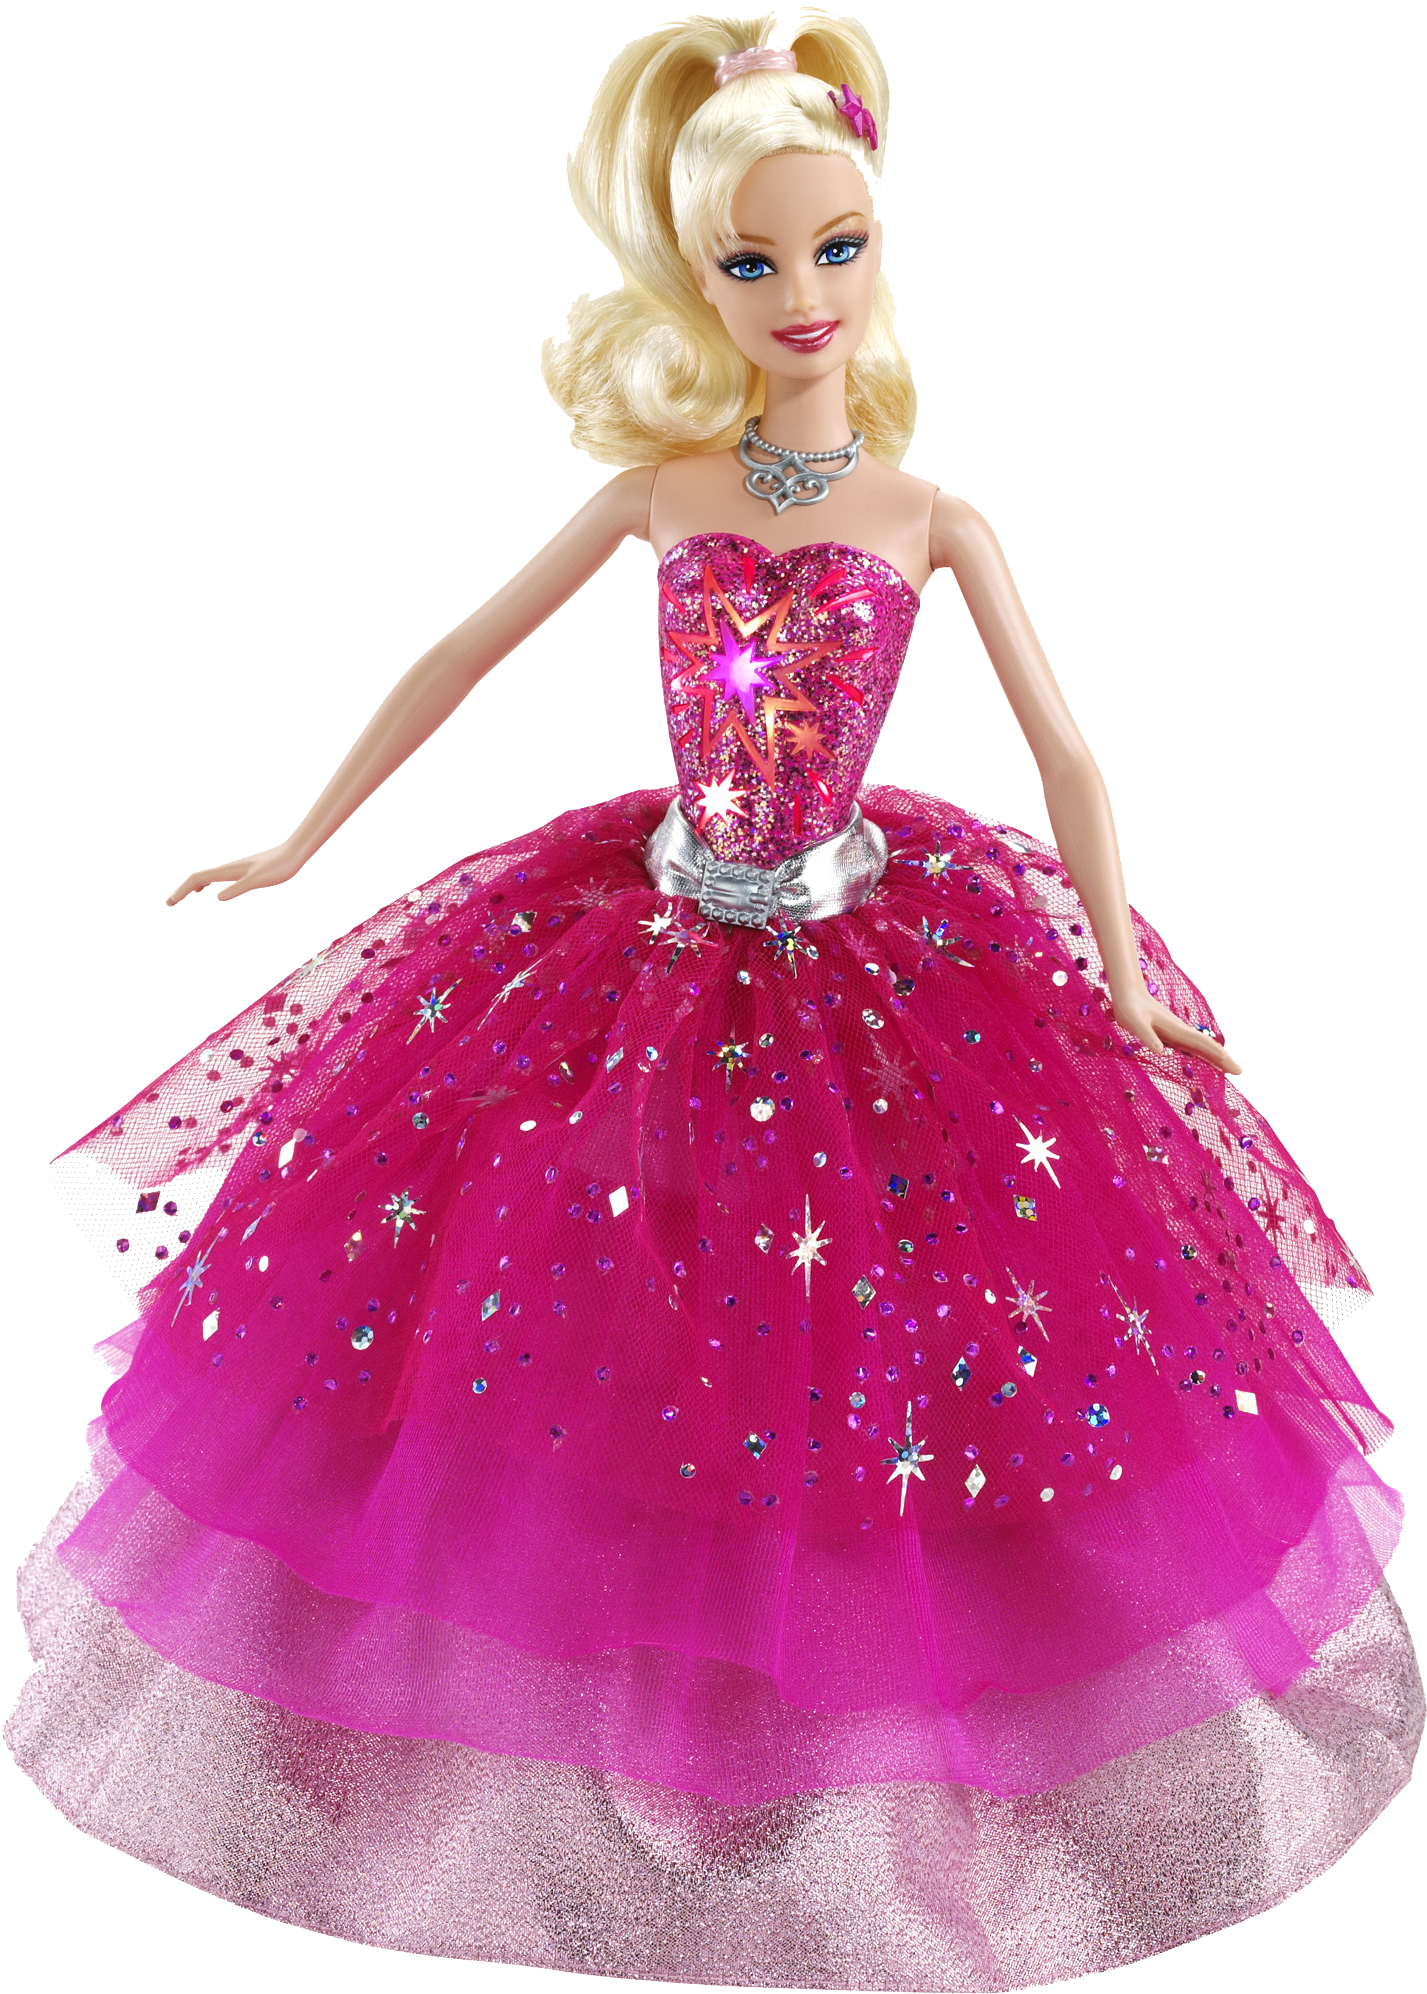 Download Barbie Background Png - Tong Kosong